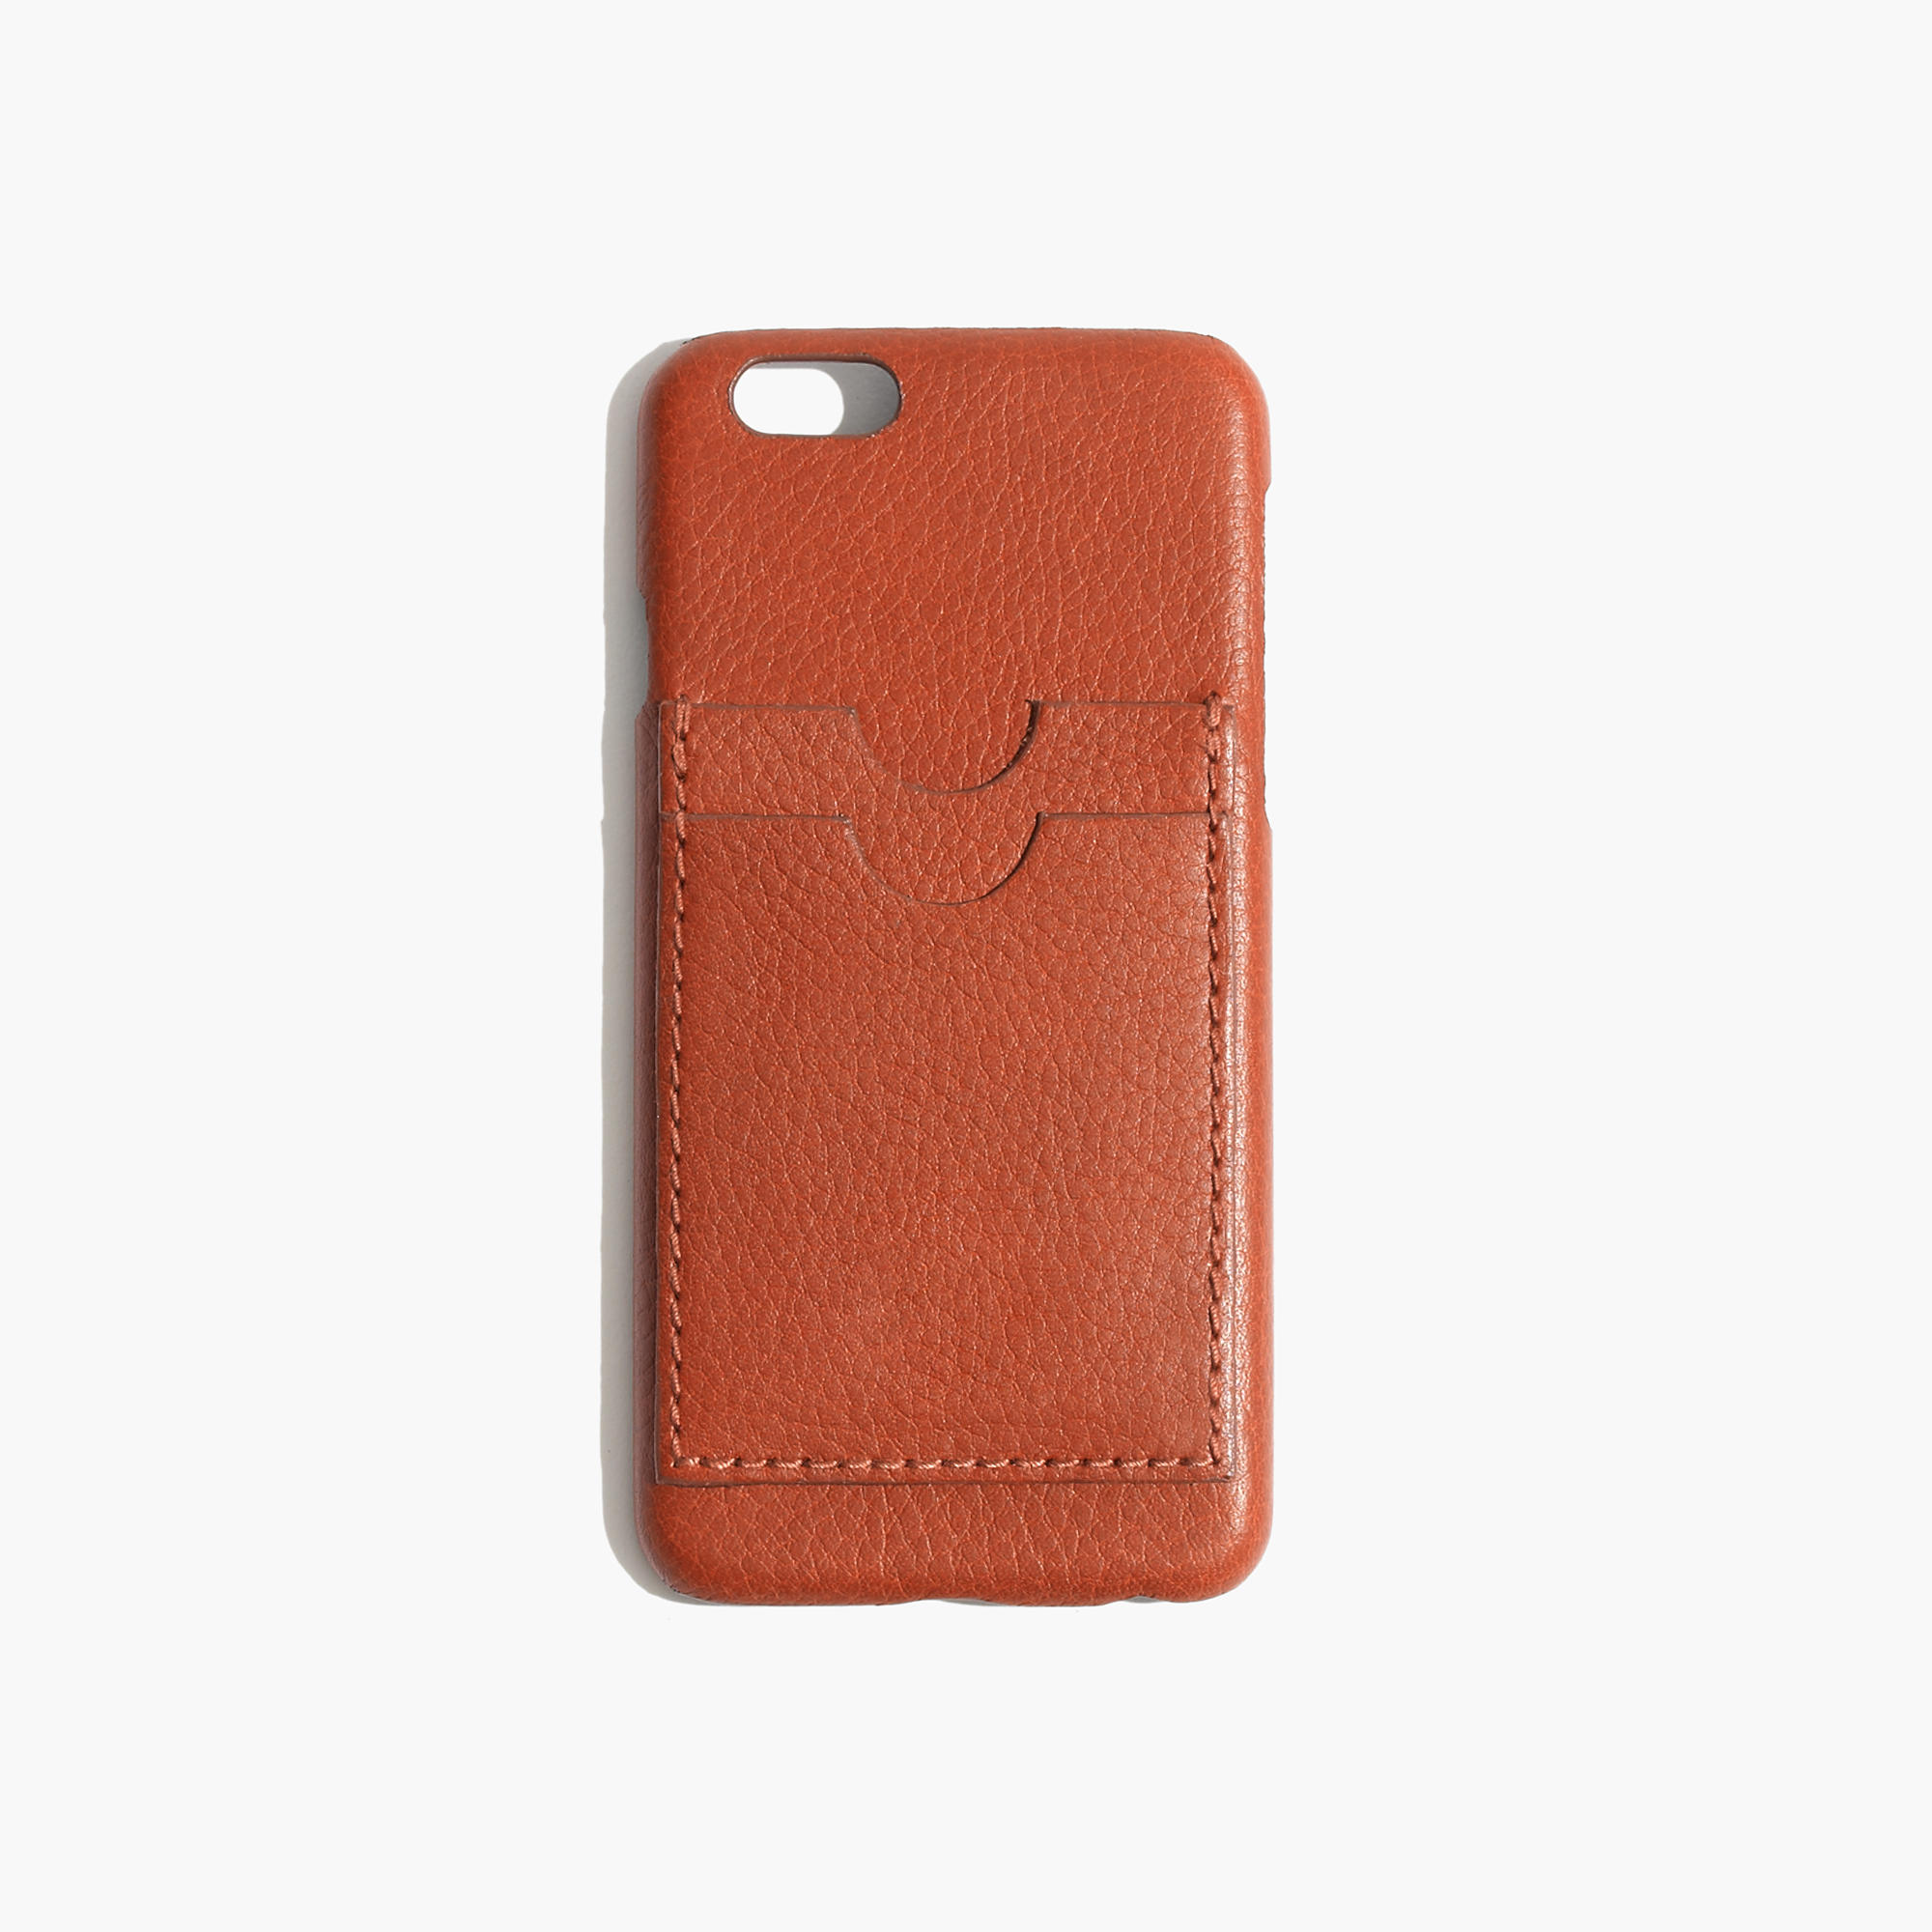 An english saddle Leather Caryall Case for iPhone 6 from Madewell is an example of a perfect valentine's day gift ideas for her.